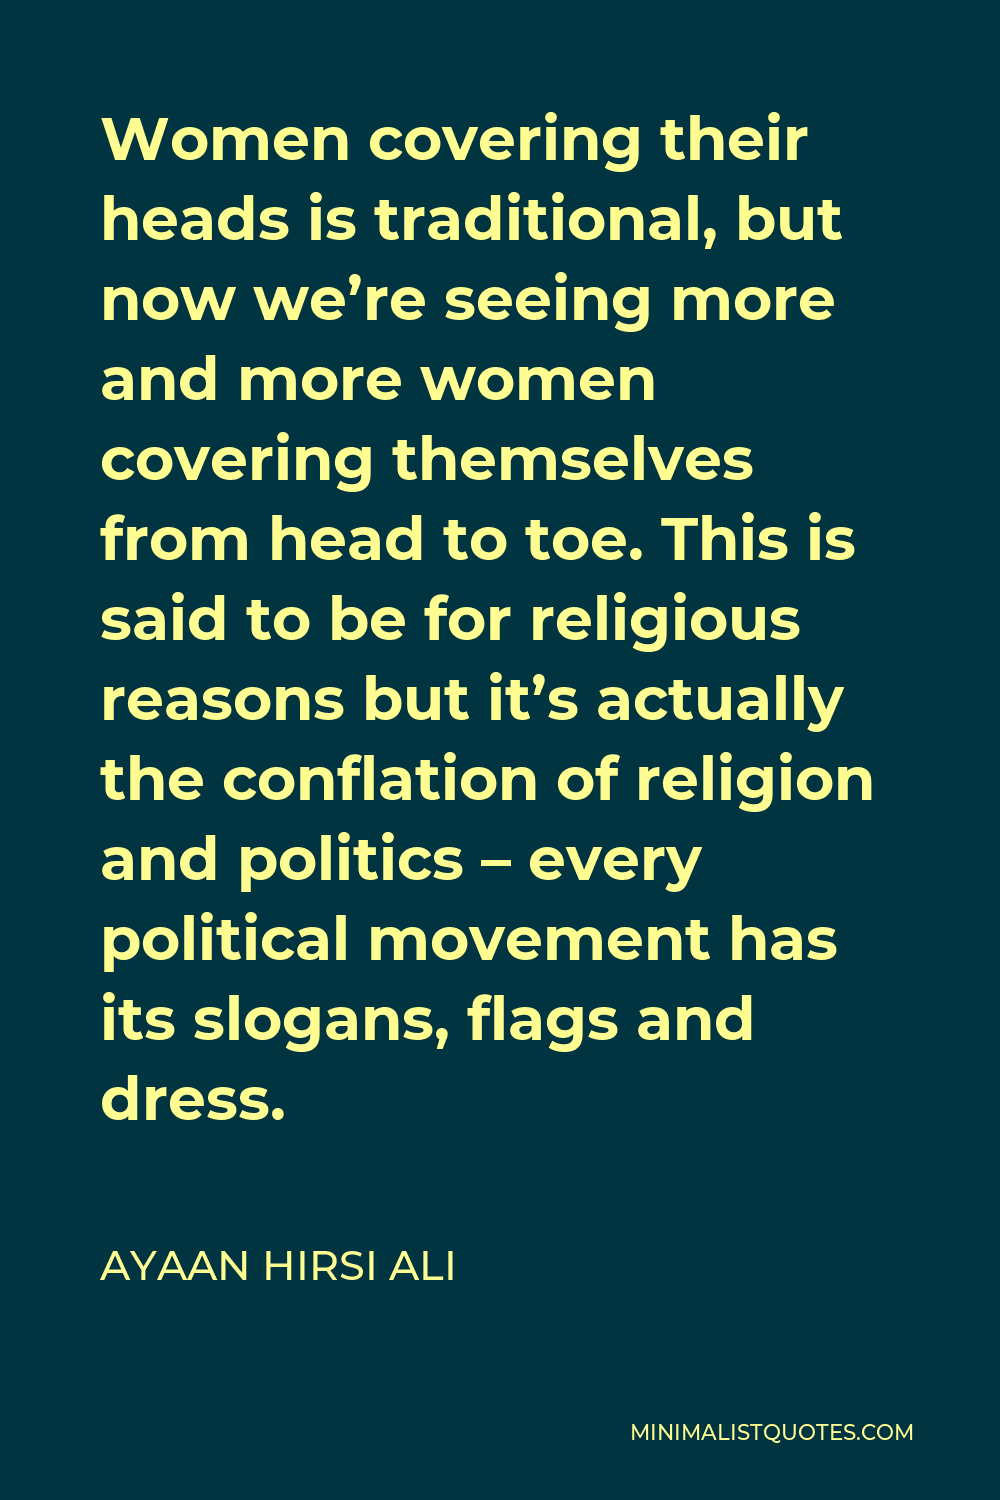 Ayaan Hirsi Ali Quote - Women covering their heads is traditional, but now we’re seeing more and more women covering themselves from head to toe. This is said to be for religious reasons but it’s actually the conflation of religion and politics – every political movement has its slogans, flags and dress.